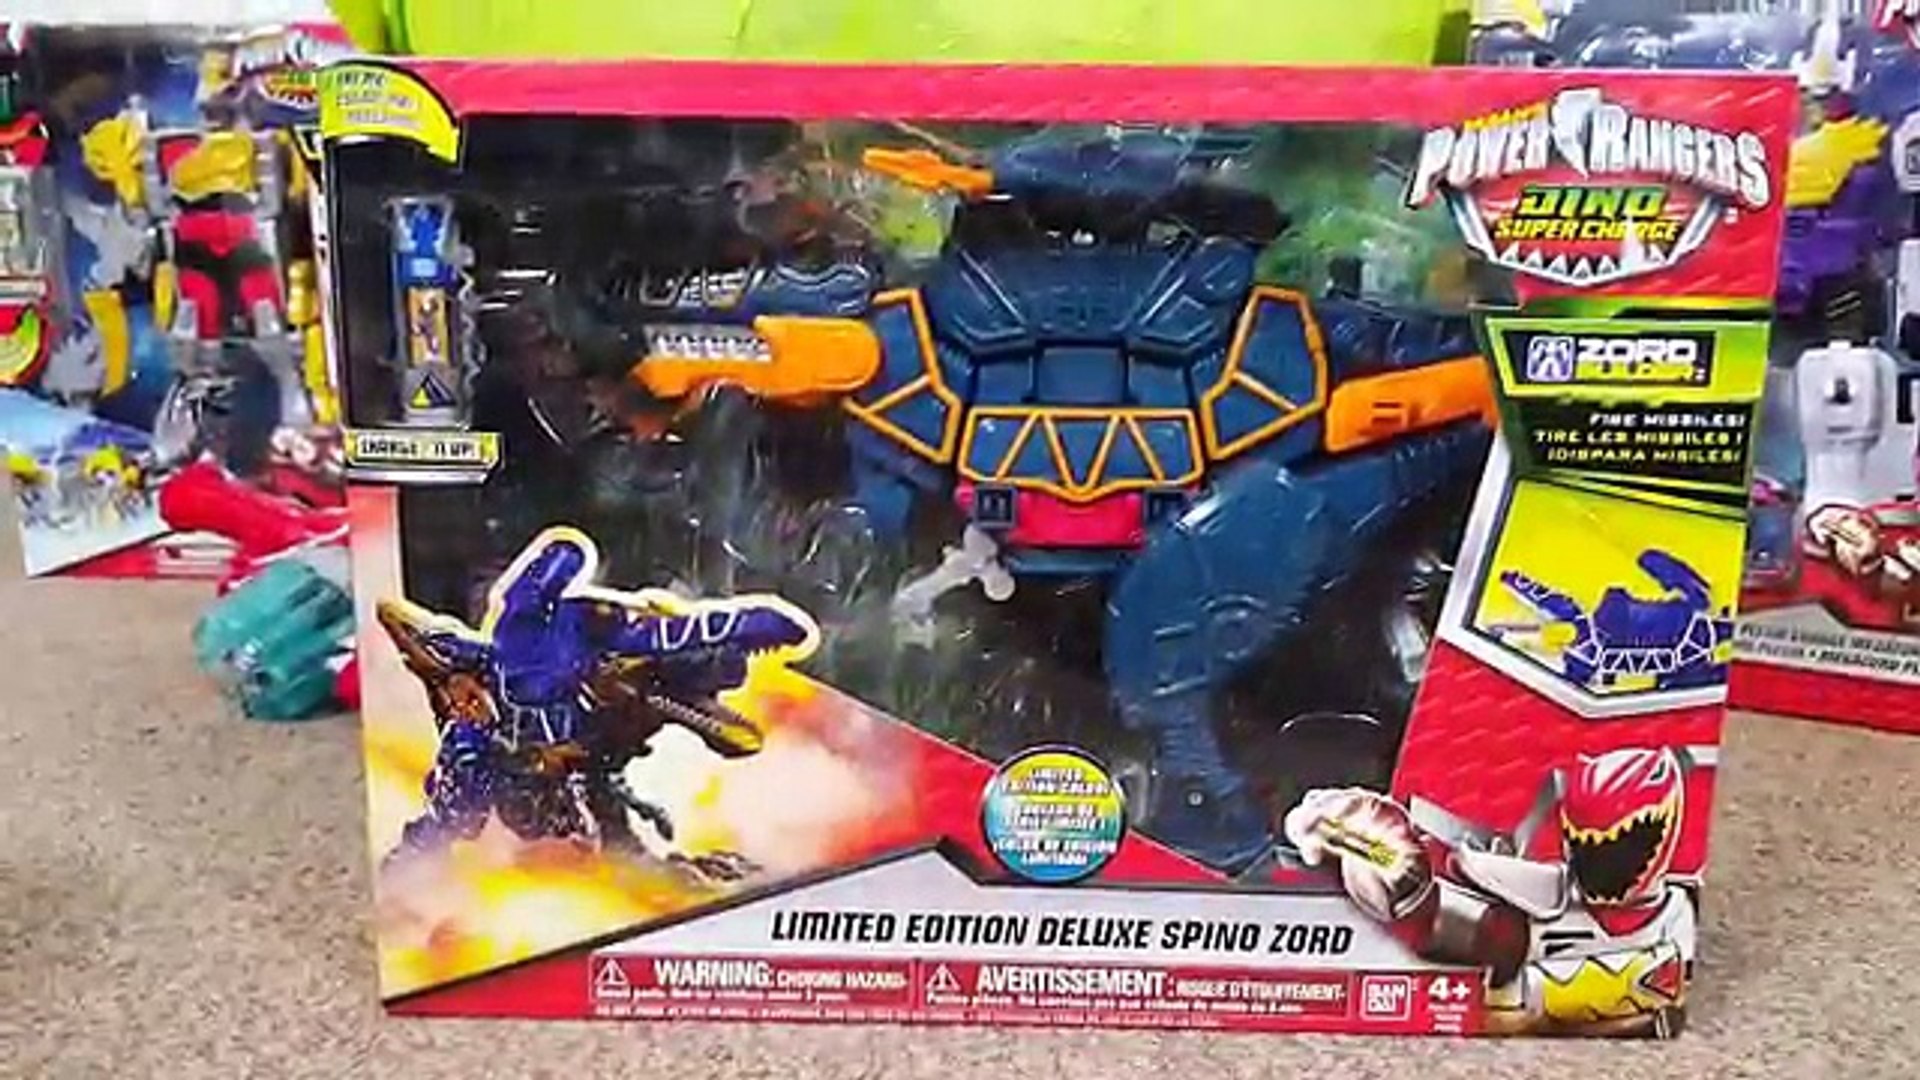 Giant Power Rangers Megazord Toys Surprise Egg opening and review for kids  - video Dailymotion